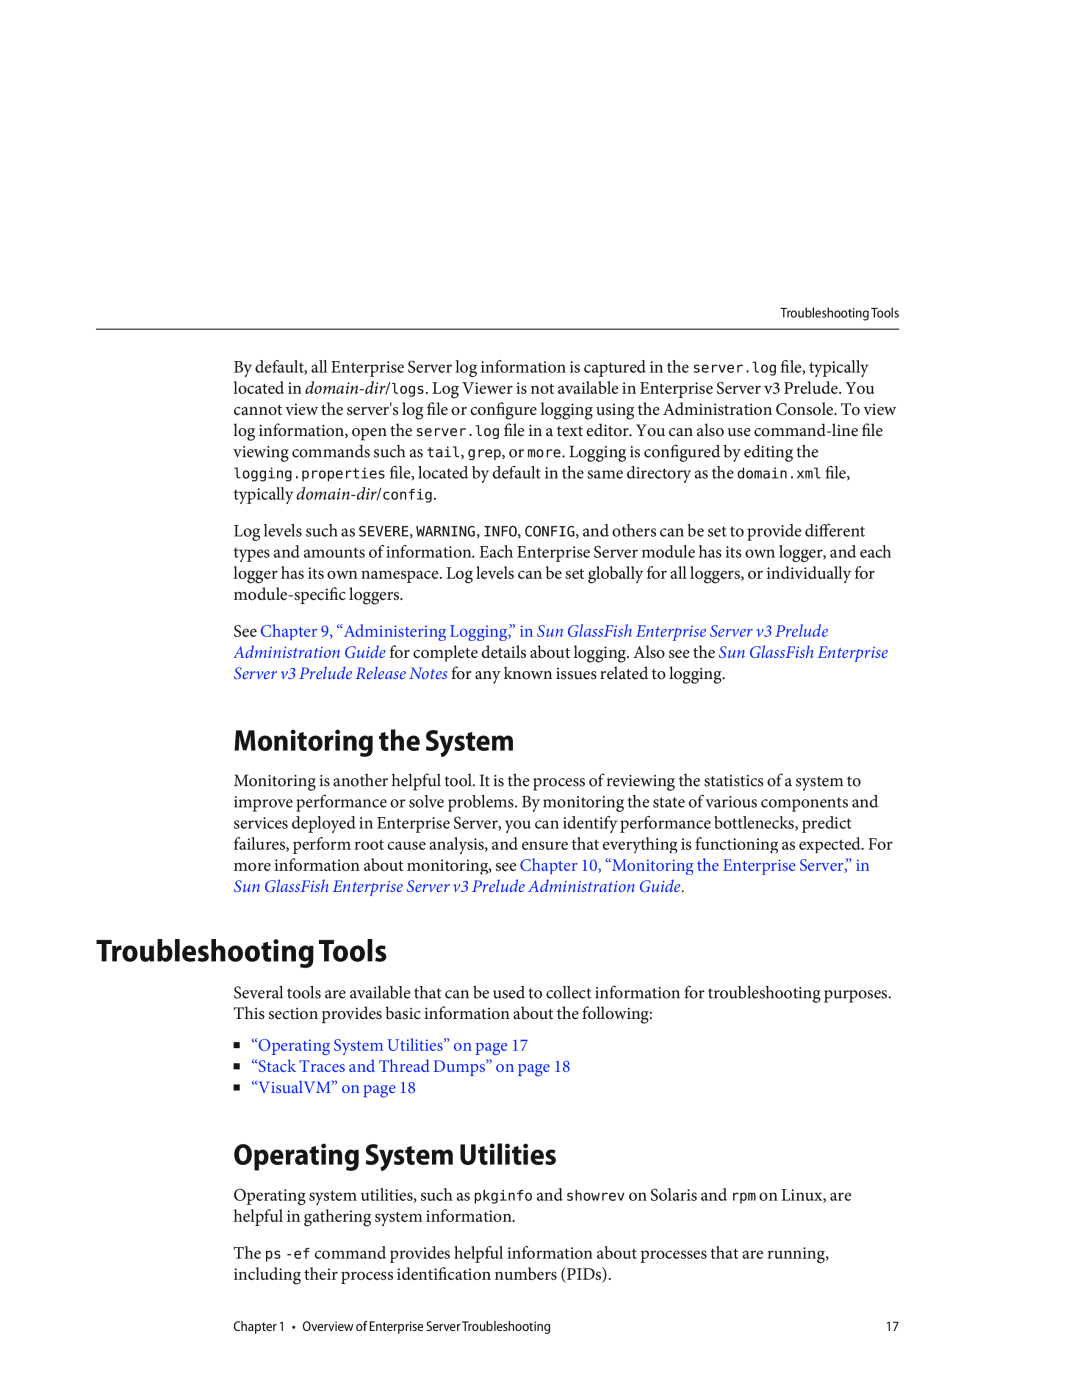 Sun Microsystems 820682310 manual Troubleshooting Tools, Monitoring the System, Operating System Utilities 